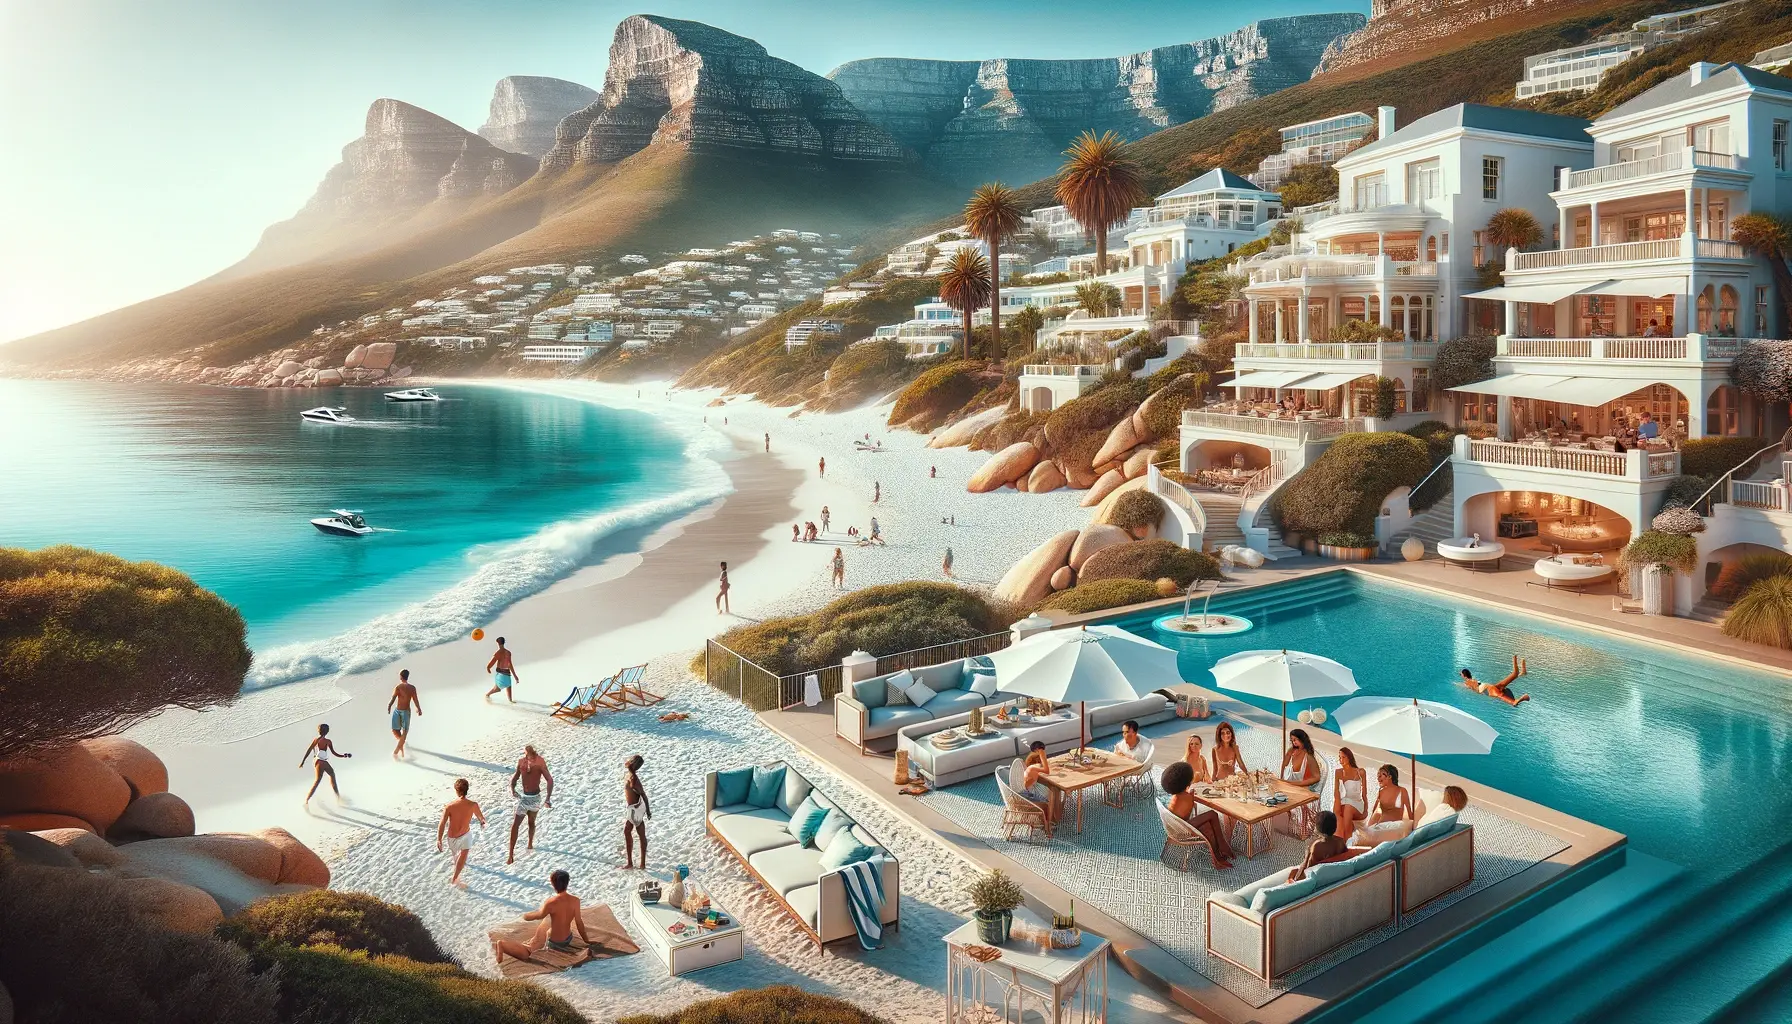 A luxurious and scenic image of Clifton Beaches in Cape Town